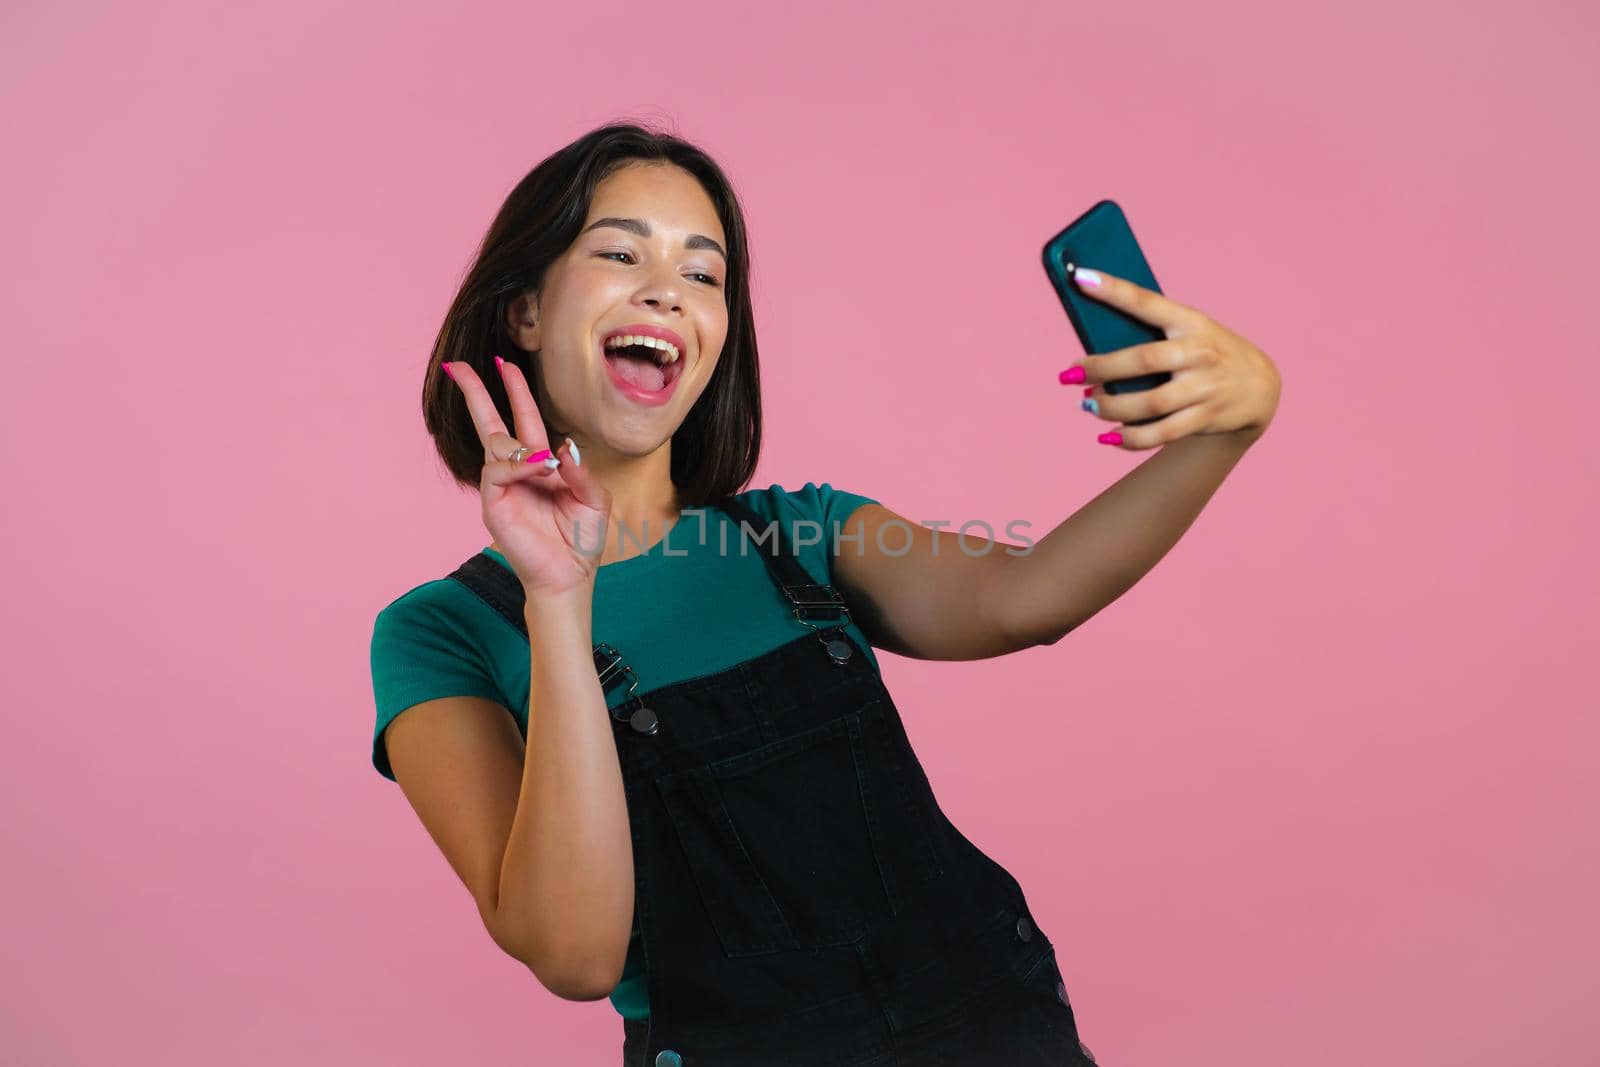 Smiling happy woman making selfie on smartphone over pink background. Technology, mobile device, social networks concept by kristina_kokhanova